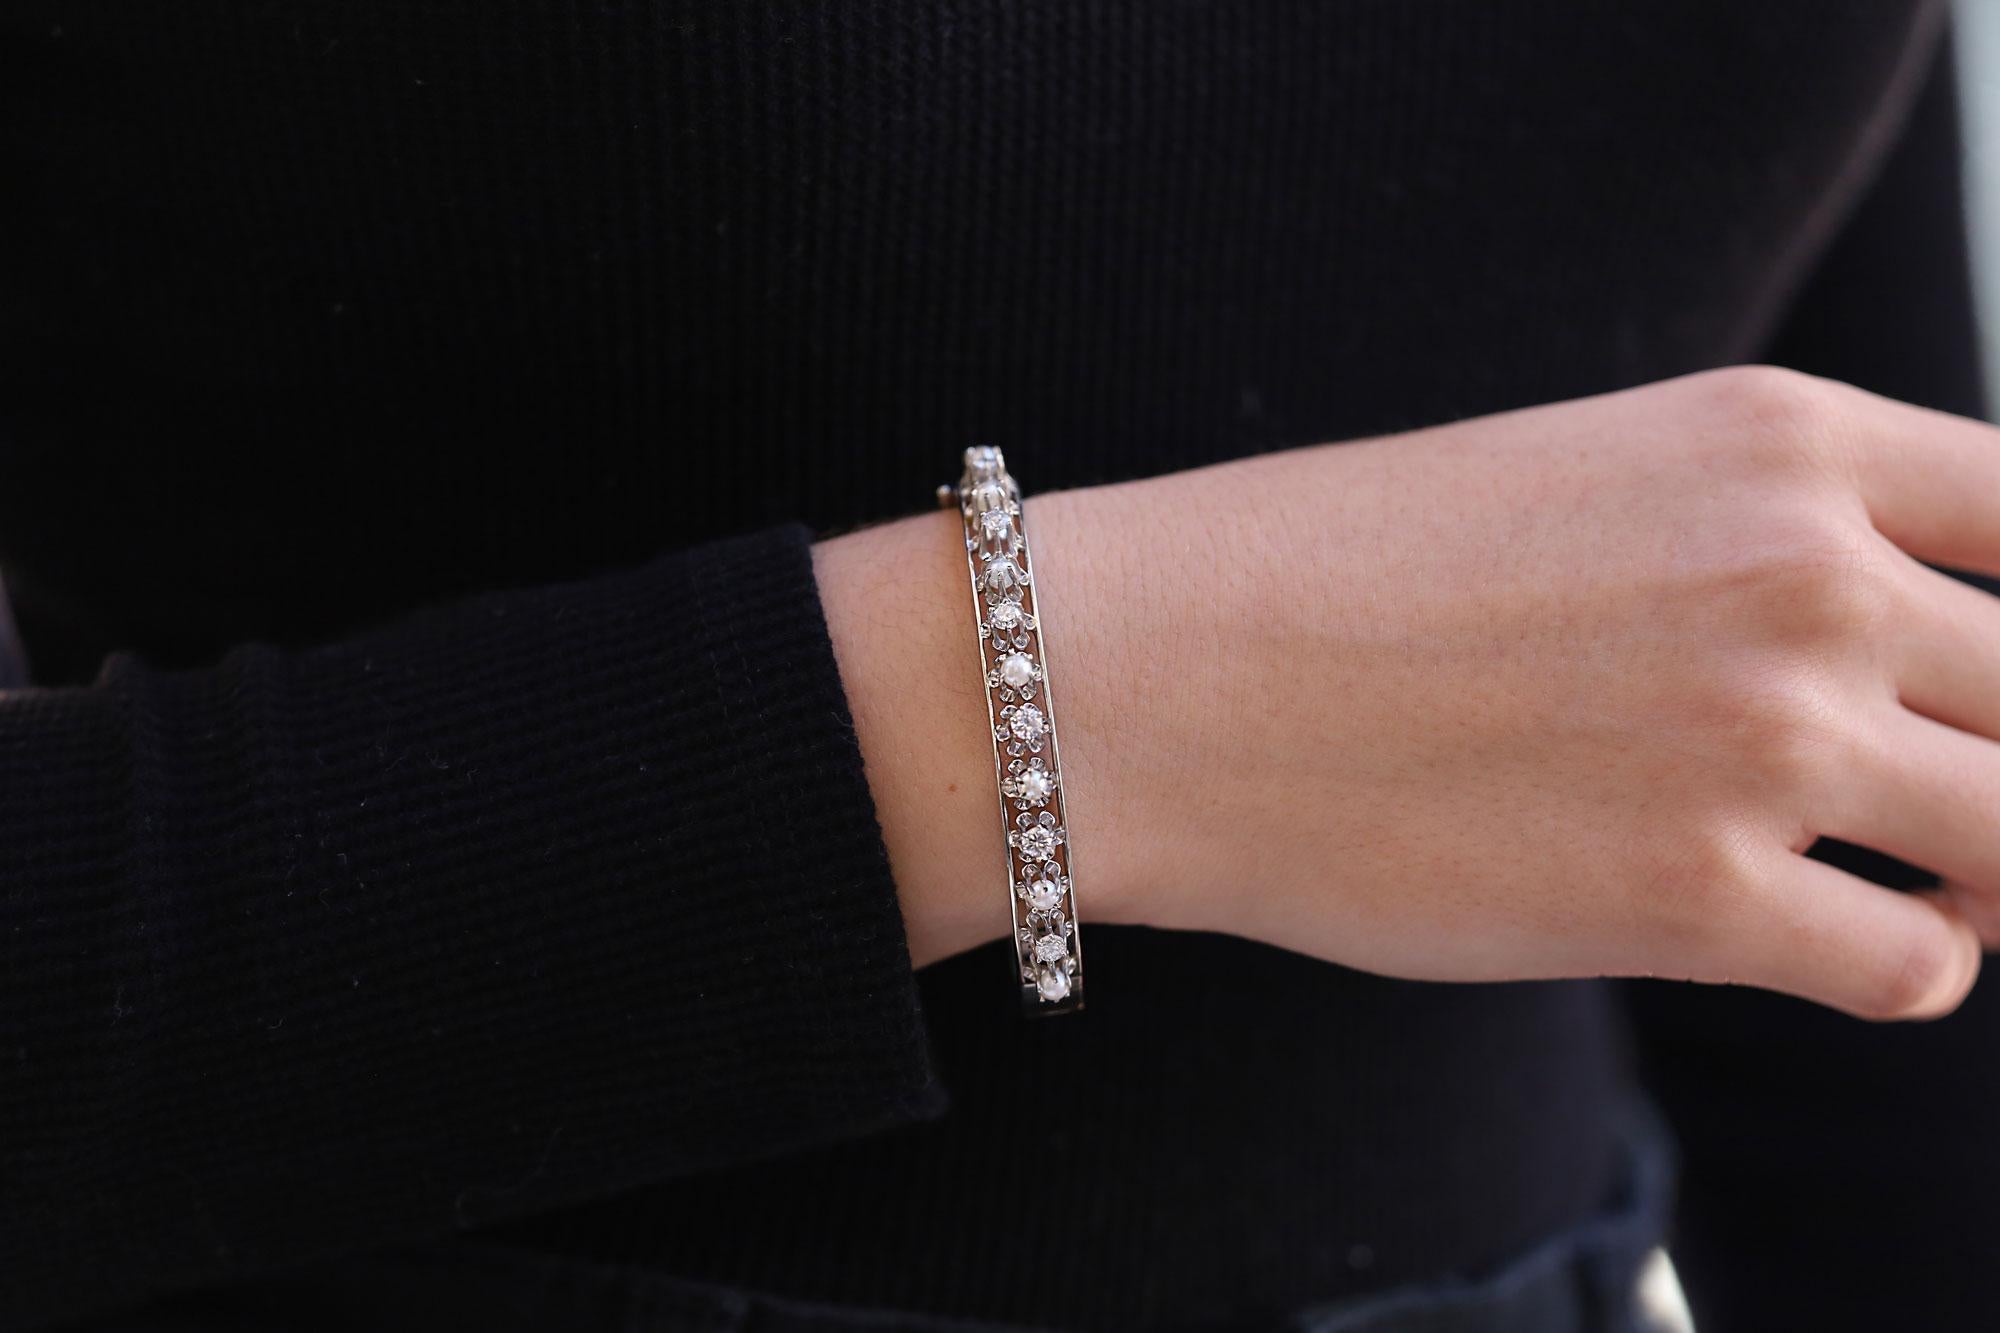 This is the perfect accessory for your wedding day jewelry and everyday. A bangle bracelet of antique distinction from the Art Deco 1920s era, this vintage estate heirloom is adorned with lustrous, cultured pearls and gleaming diamonds. The gems set